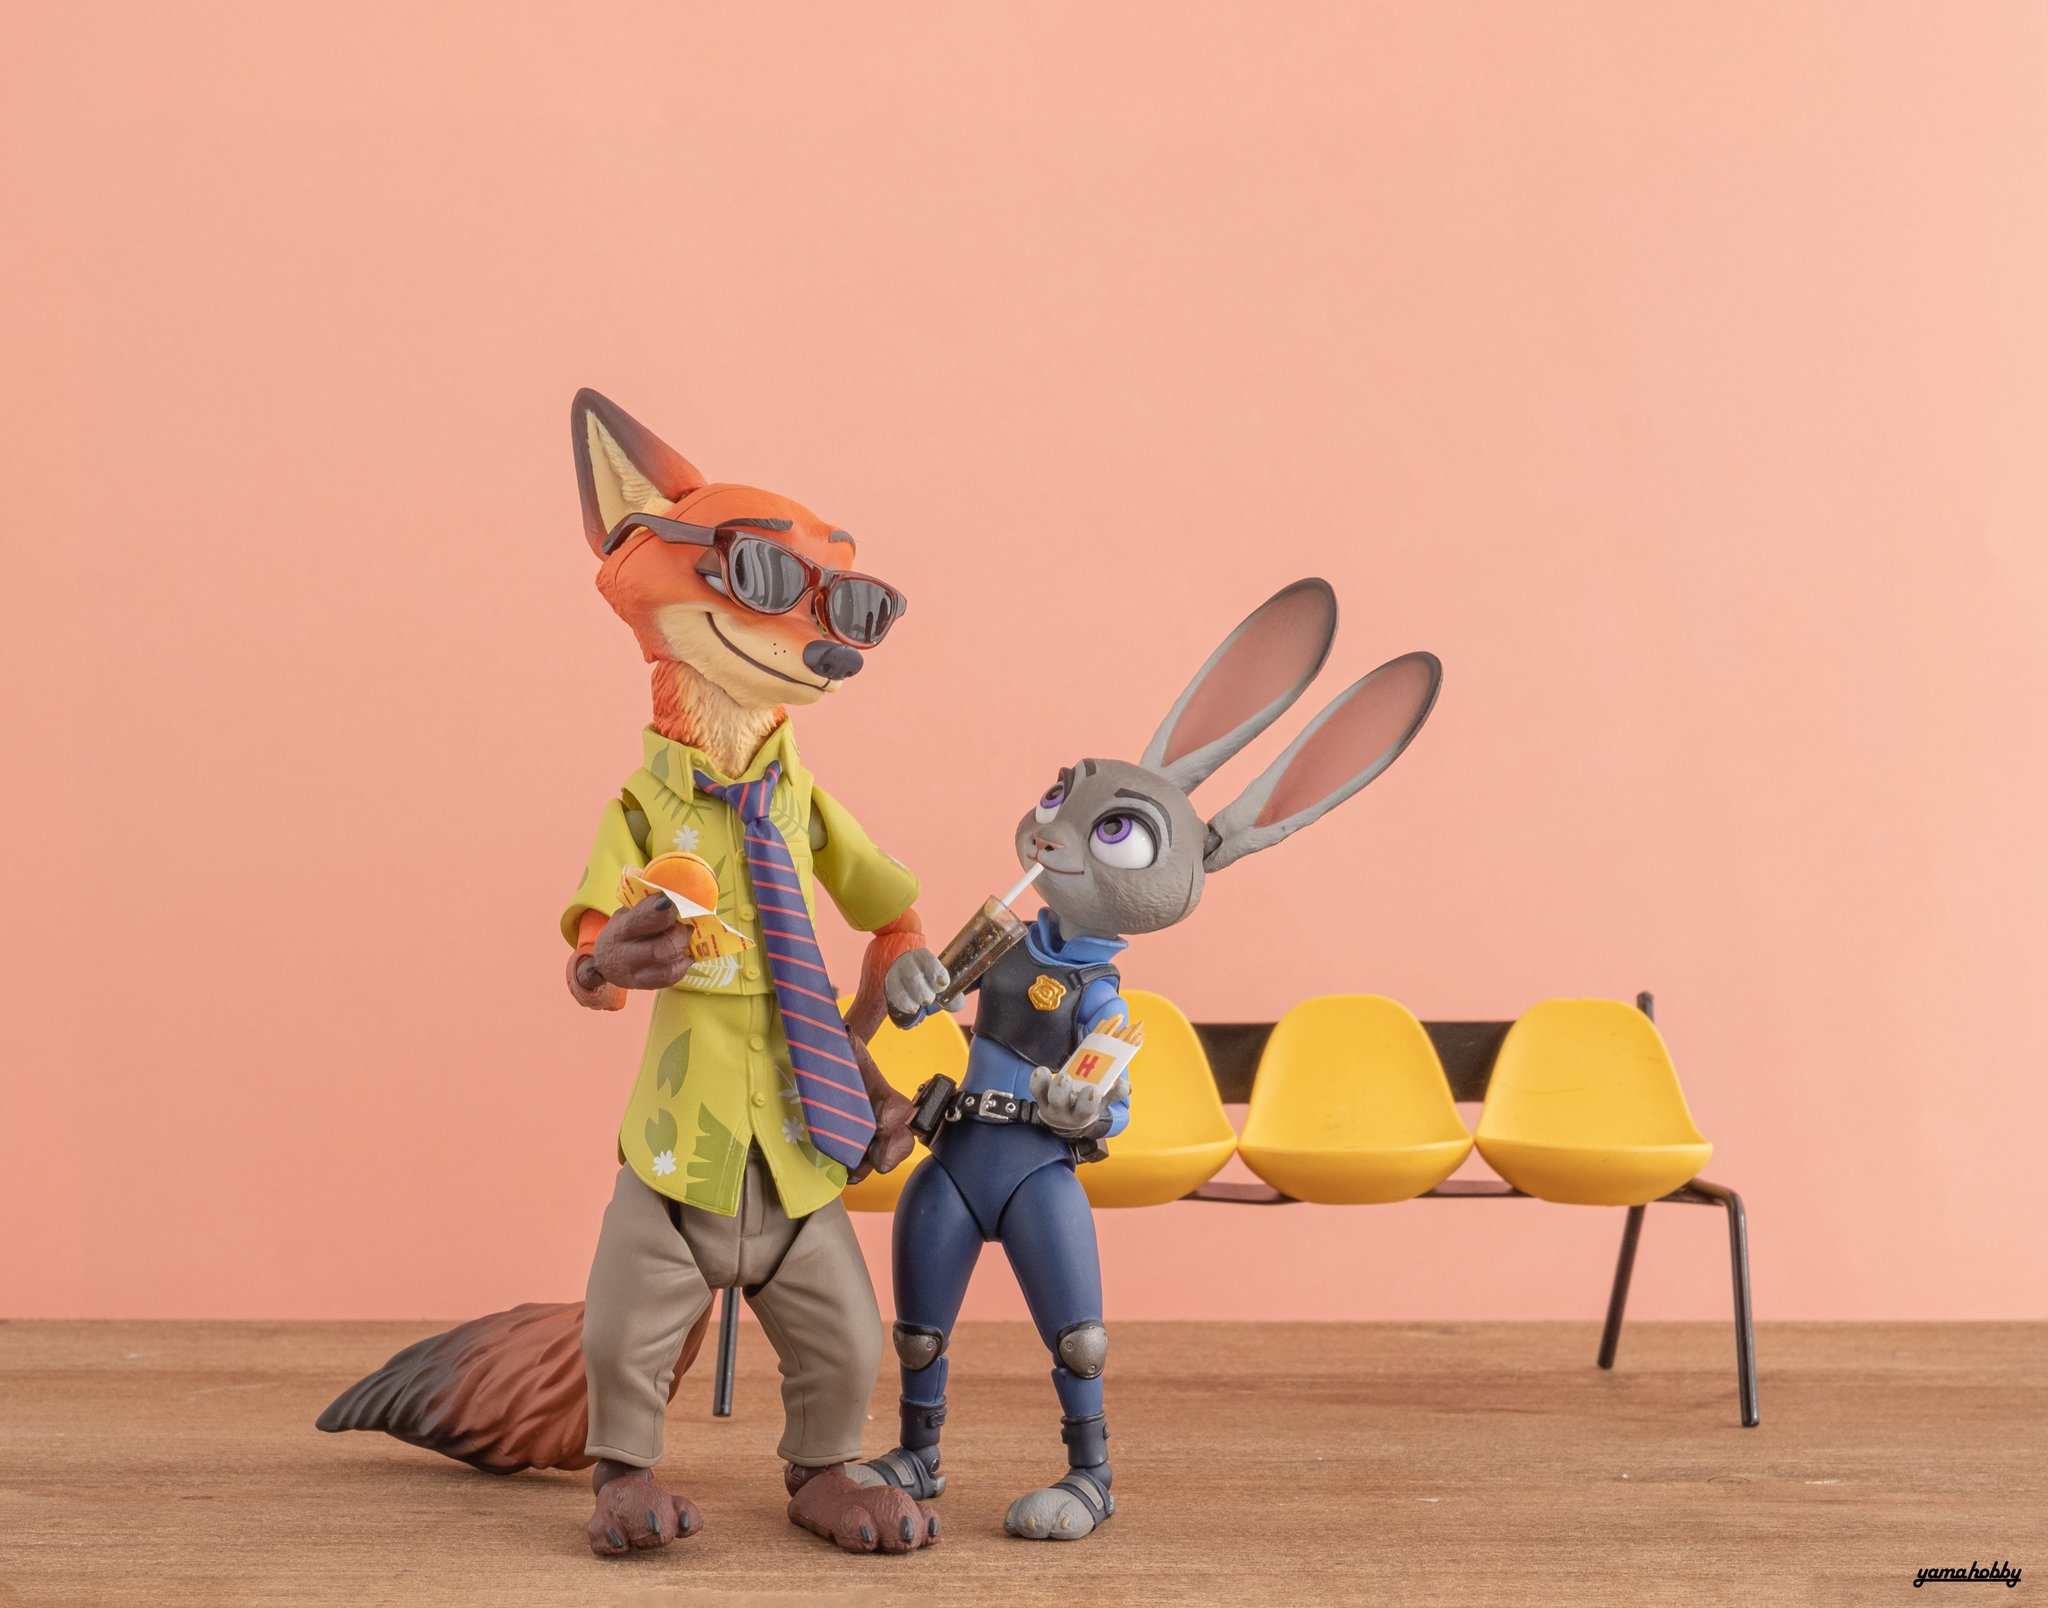 Spend the weekend right - spend it together - Zootopia, Nick and Judy, Nick wilde, Judy hopps, Figurines, The photo, Longpost